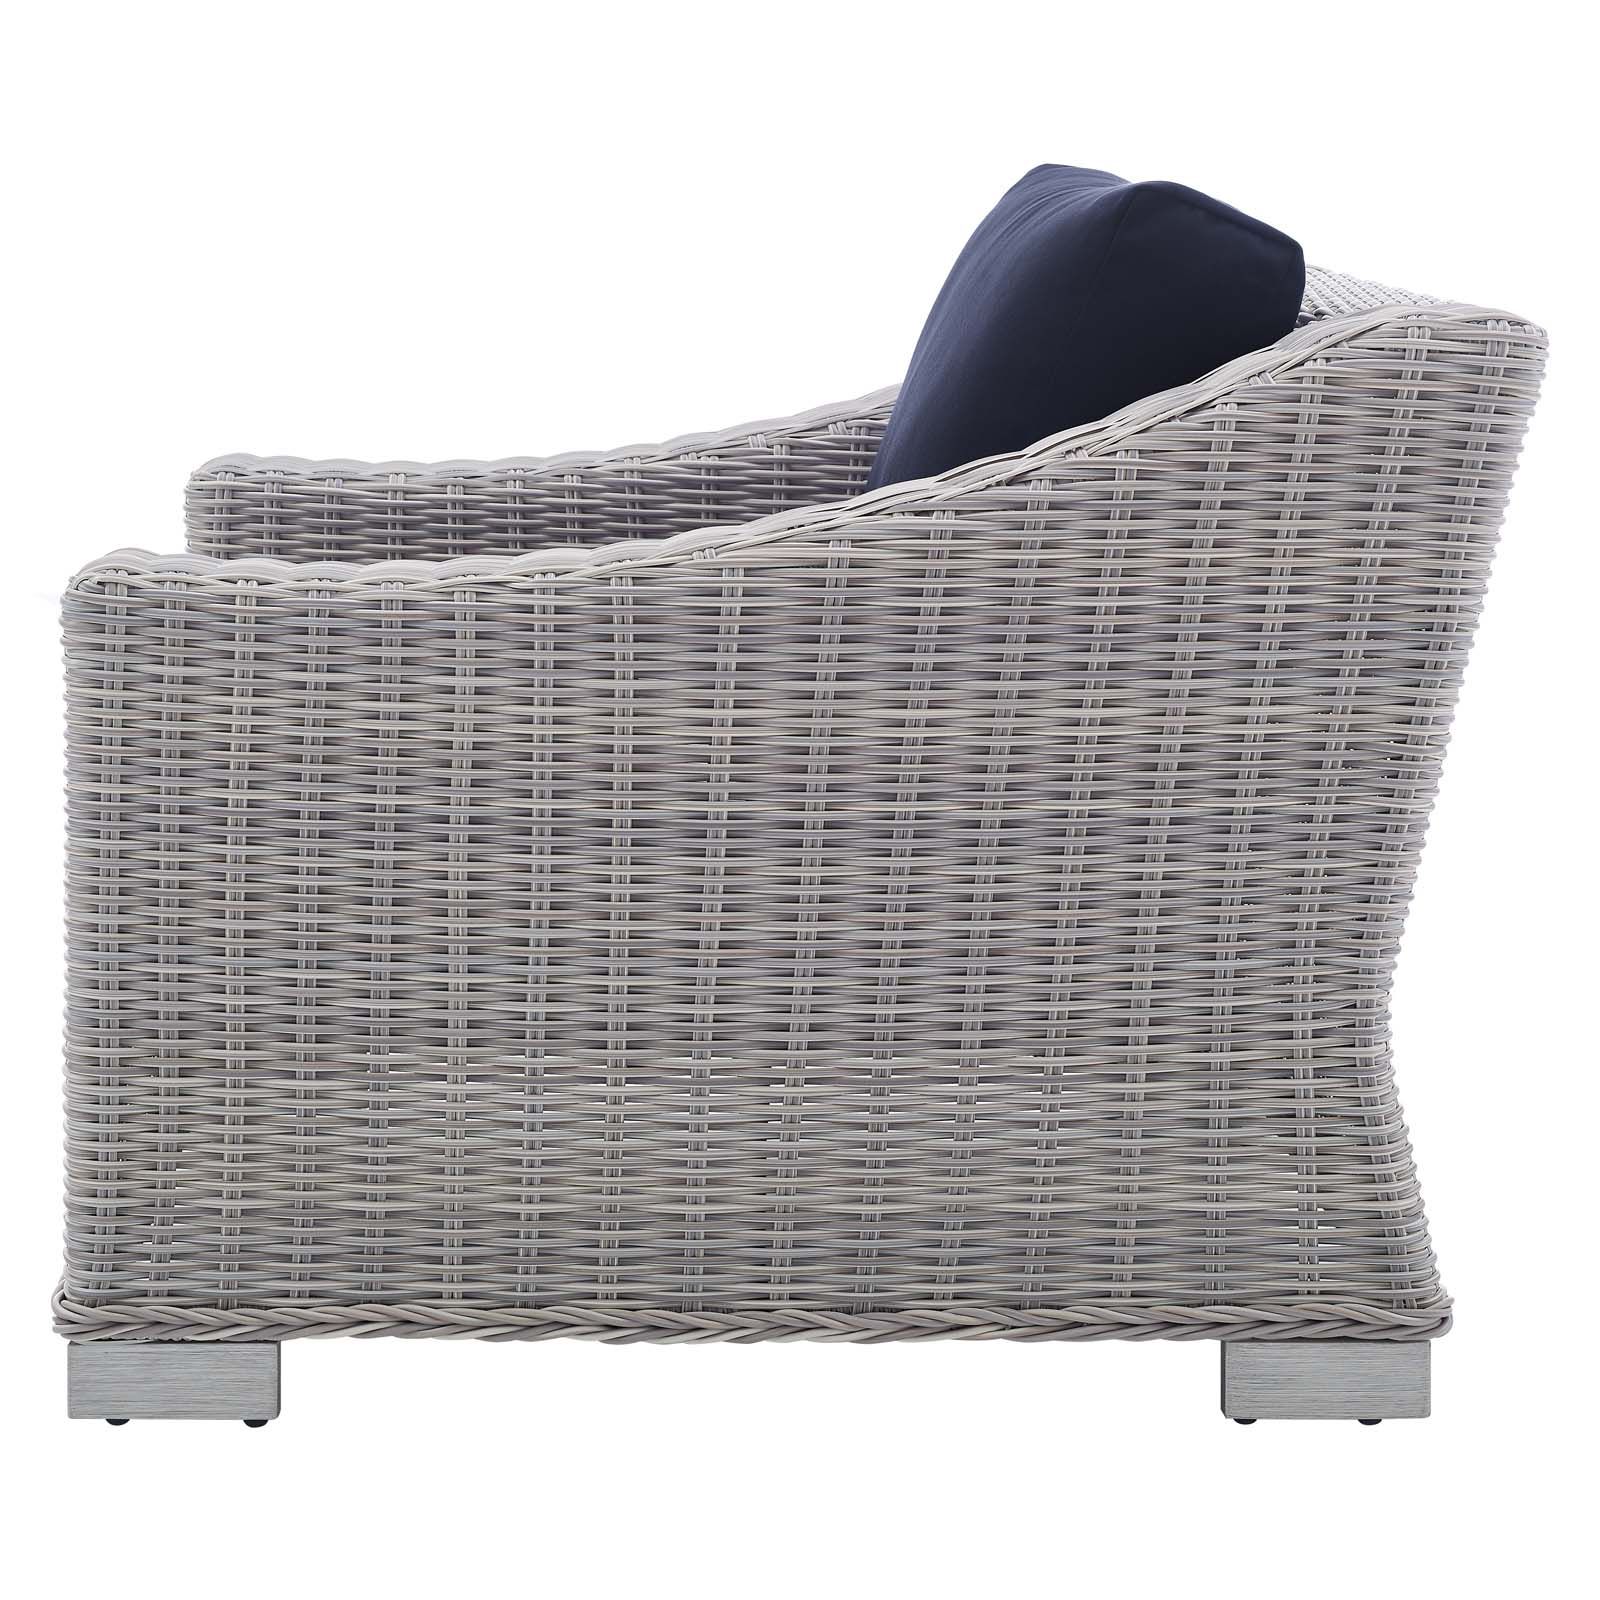 Conway Sunbrella® Outdoor Patio Wicker Rattan 2 Piece Armchair And Within Trendy Navy And Light Gray Woven Pouf Ottomans (View 2 of 10)